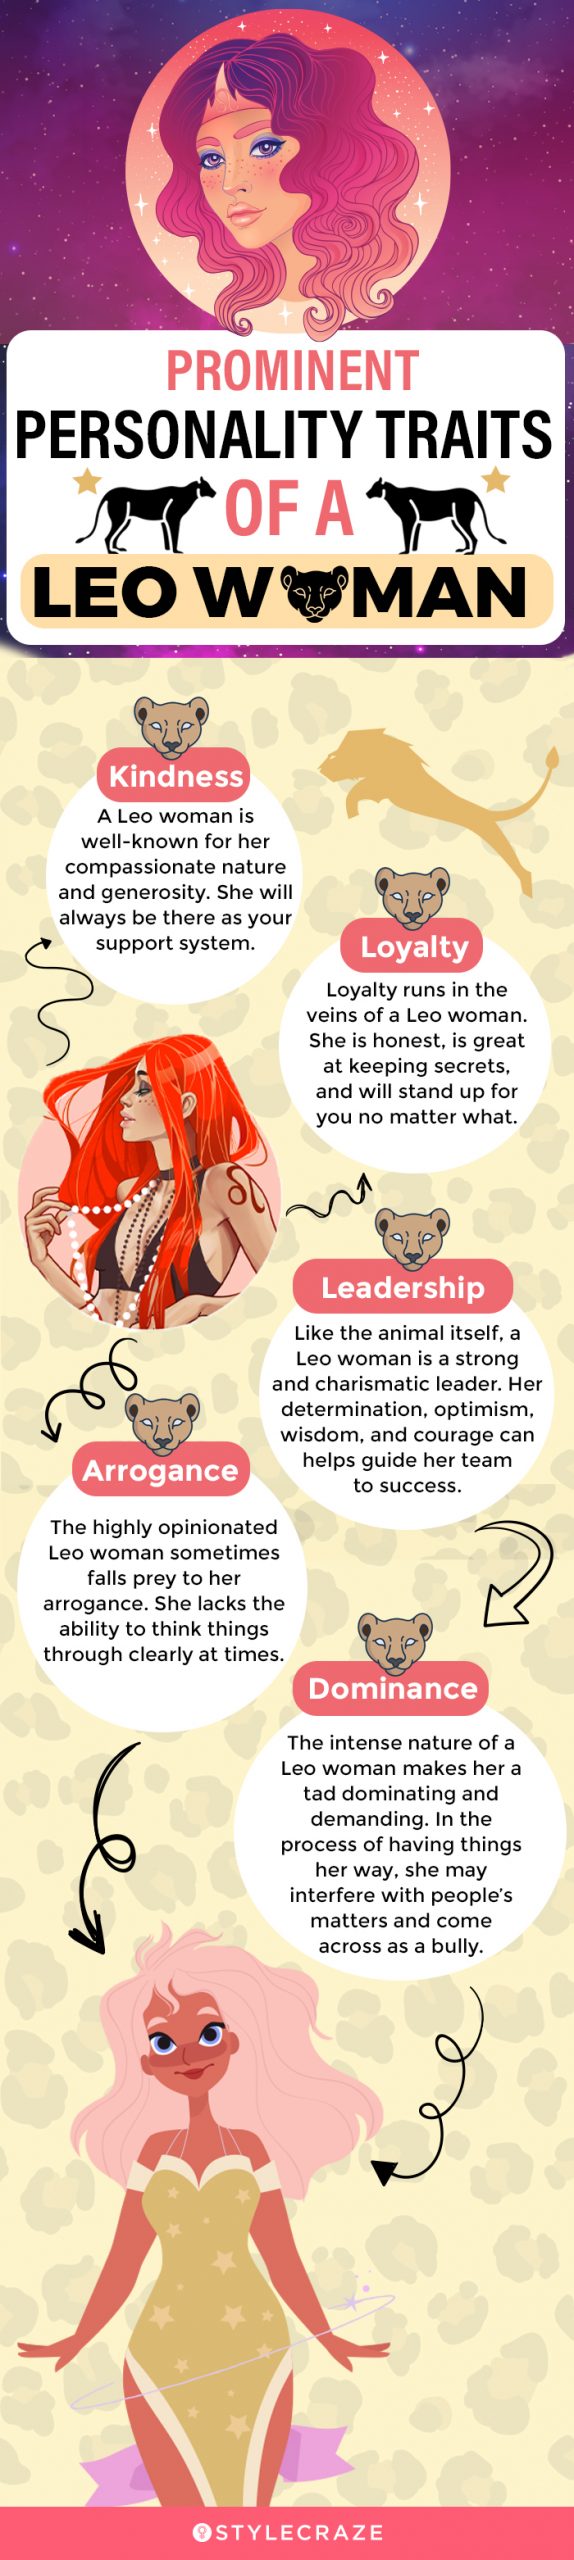 prominent personality traits of a leo woman (infographic)